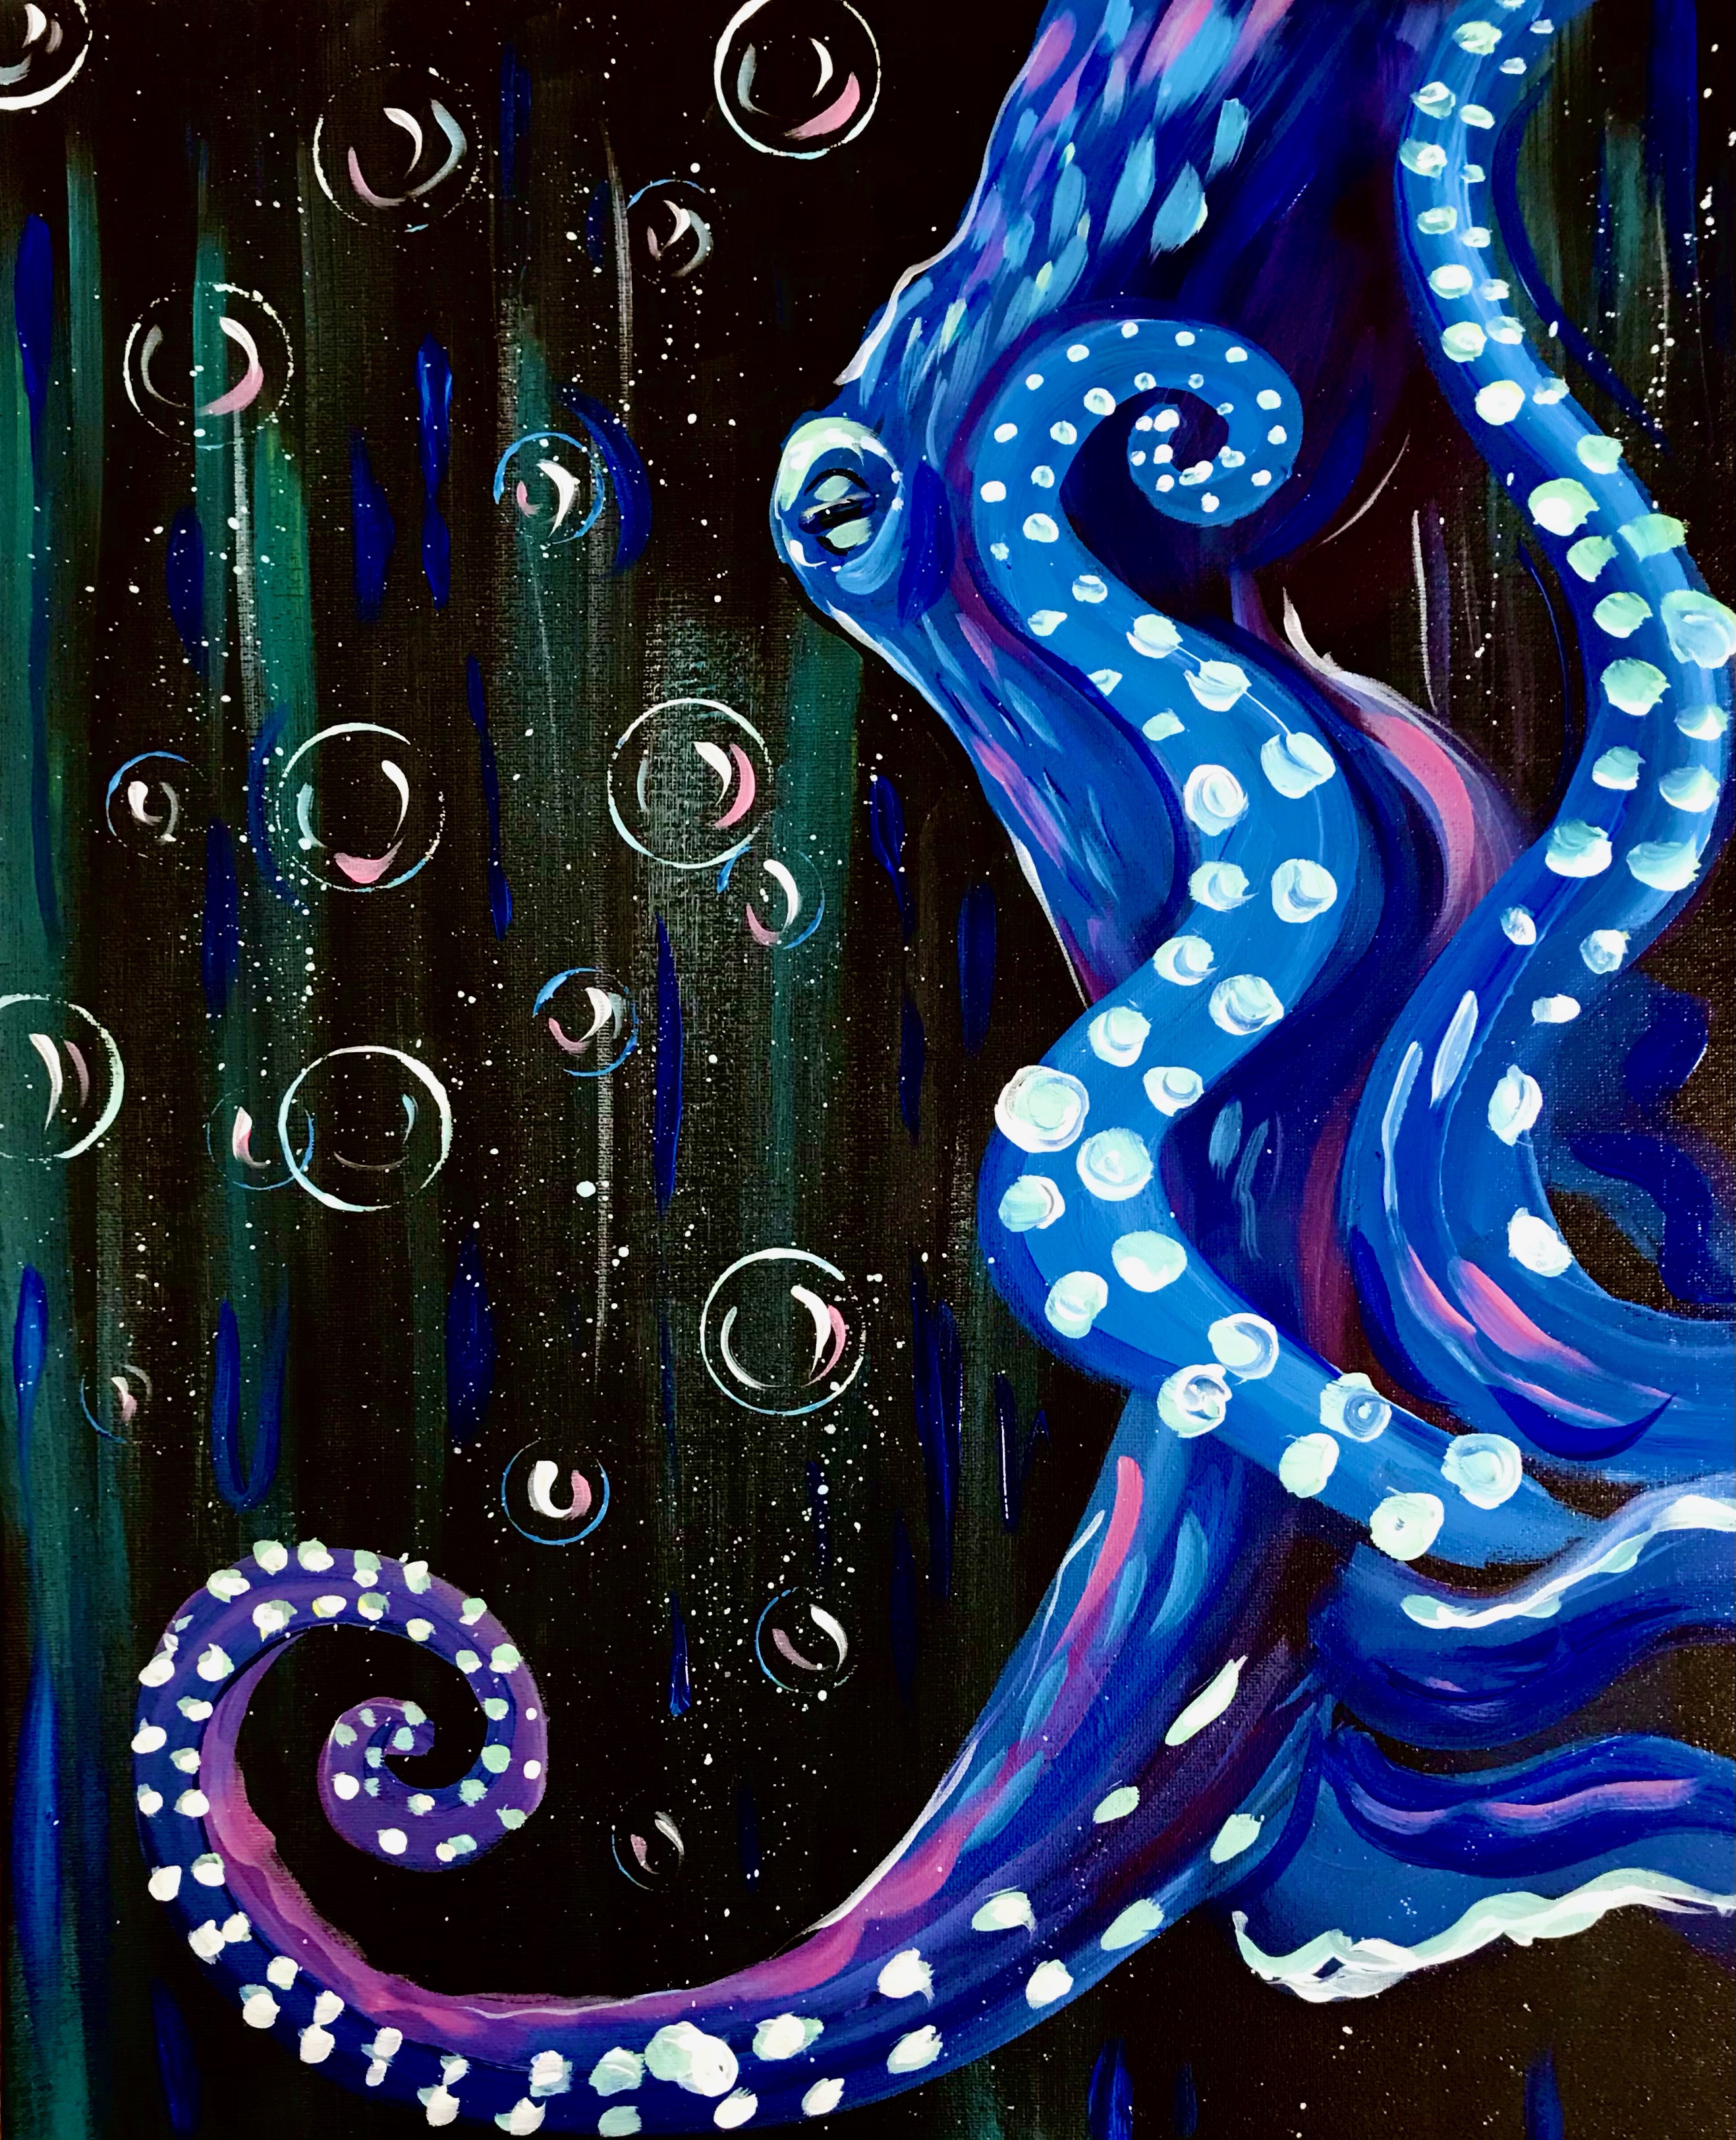 A Mystic Octopus experience project by Yaymaker